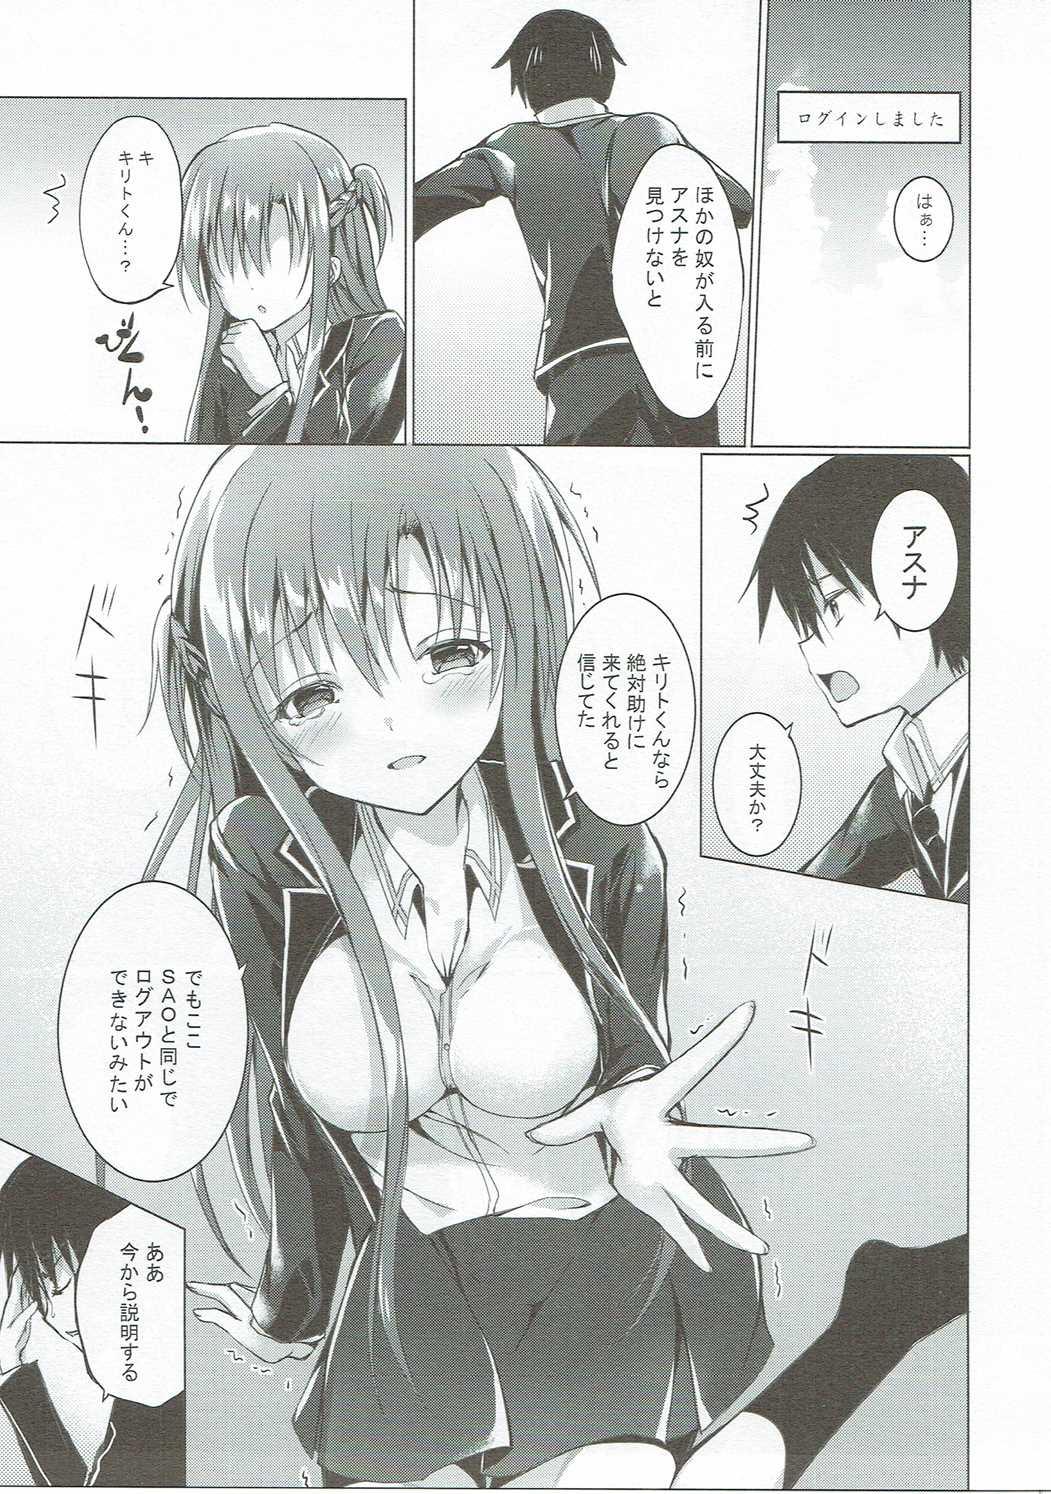 Family Sex Asuna to VR Game - Sword art online Amateur Sex - Page 6